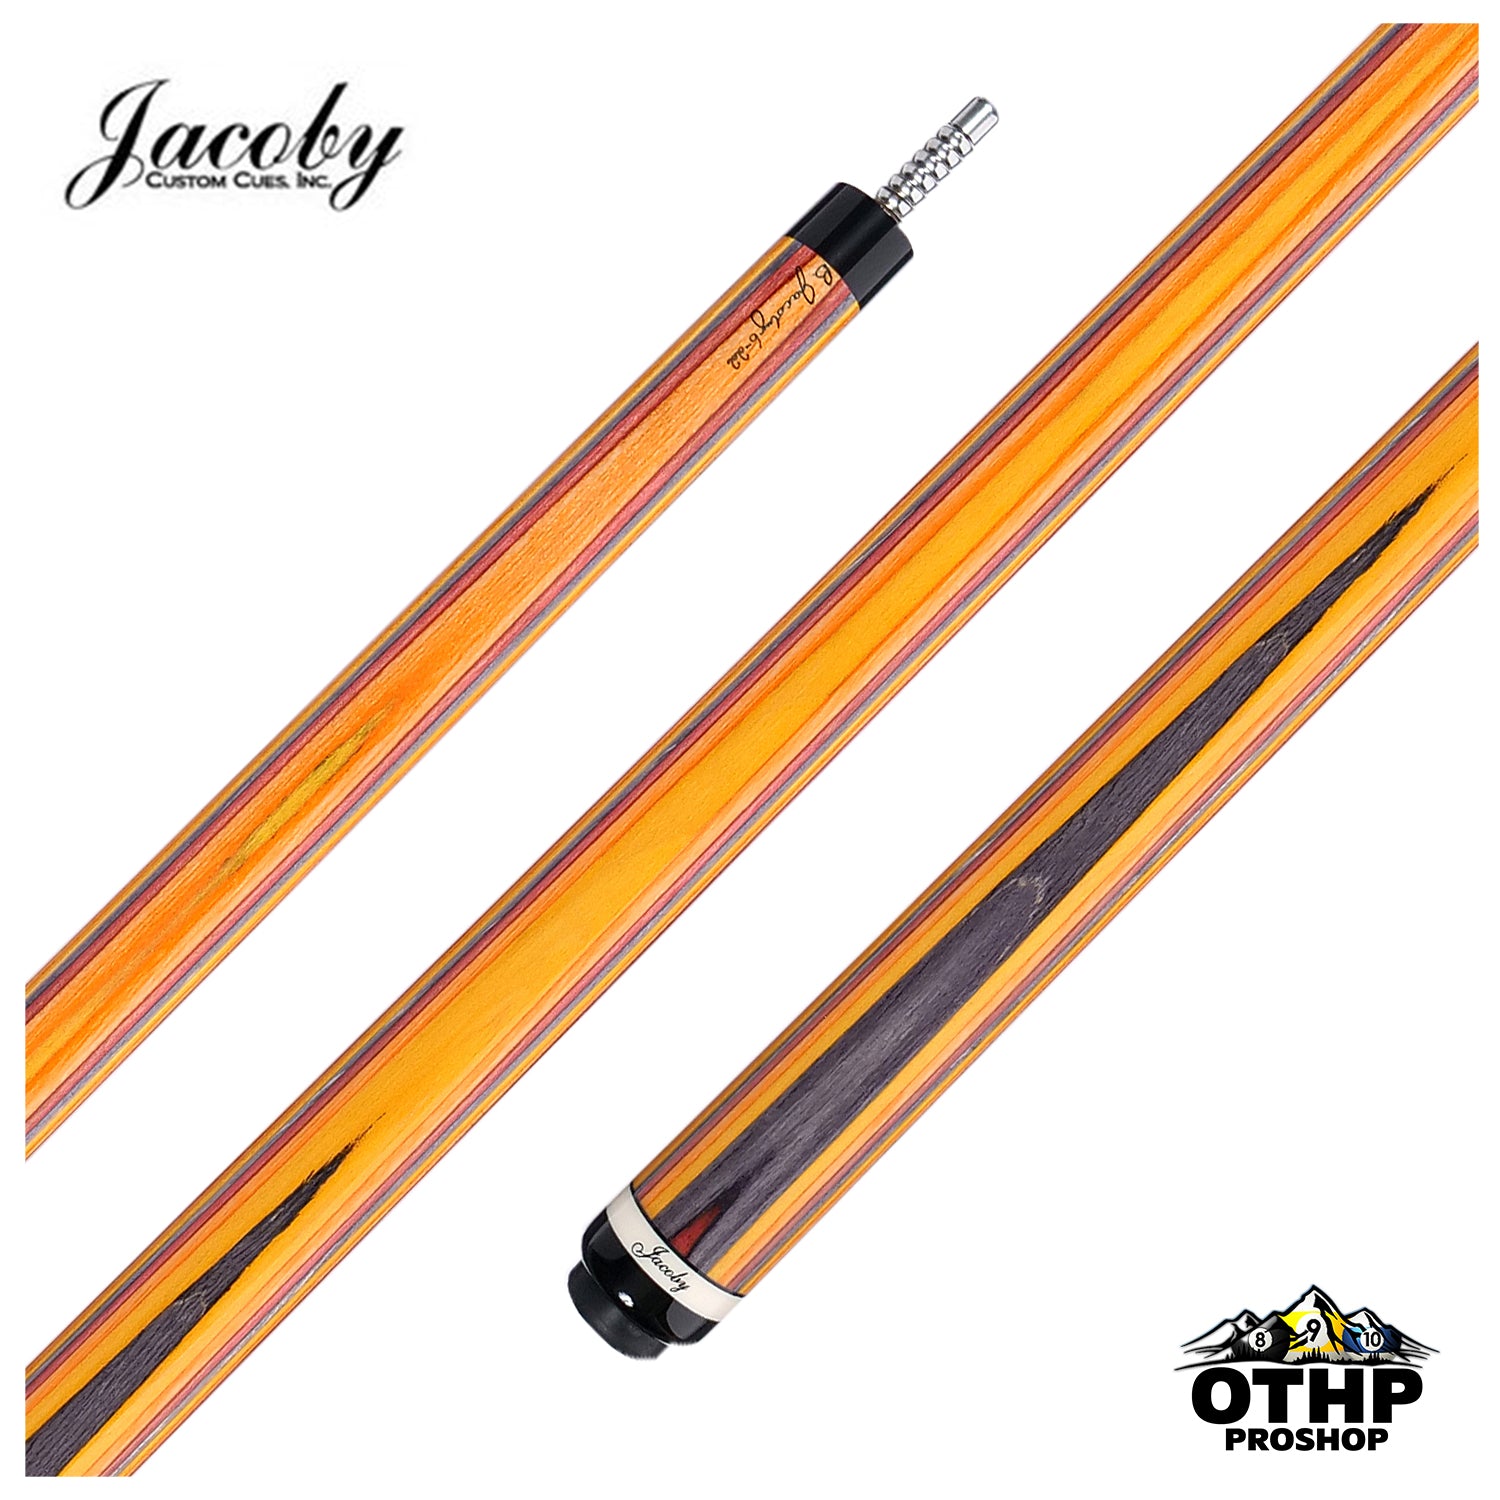 Jacoby Element Series Cues